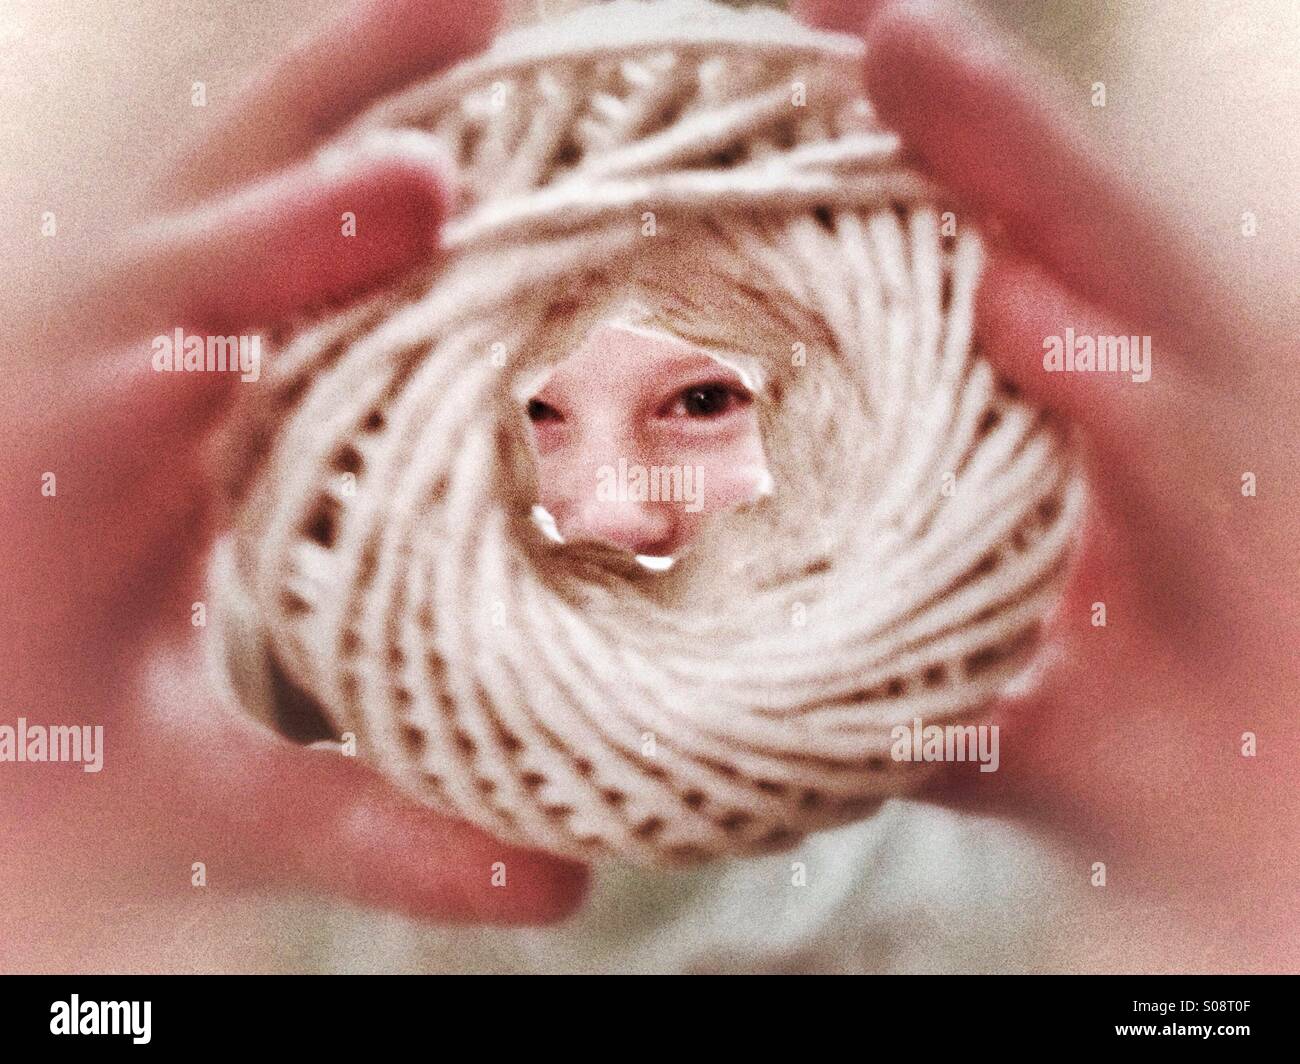 Young girl looking through roll of string Stock Photo - Alamy